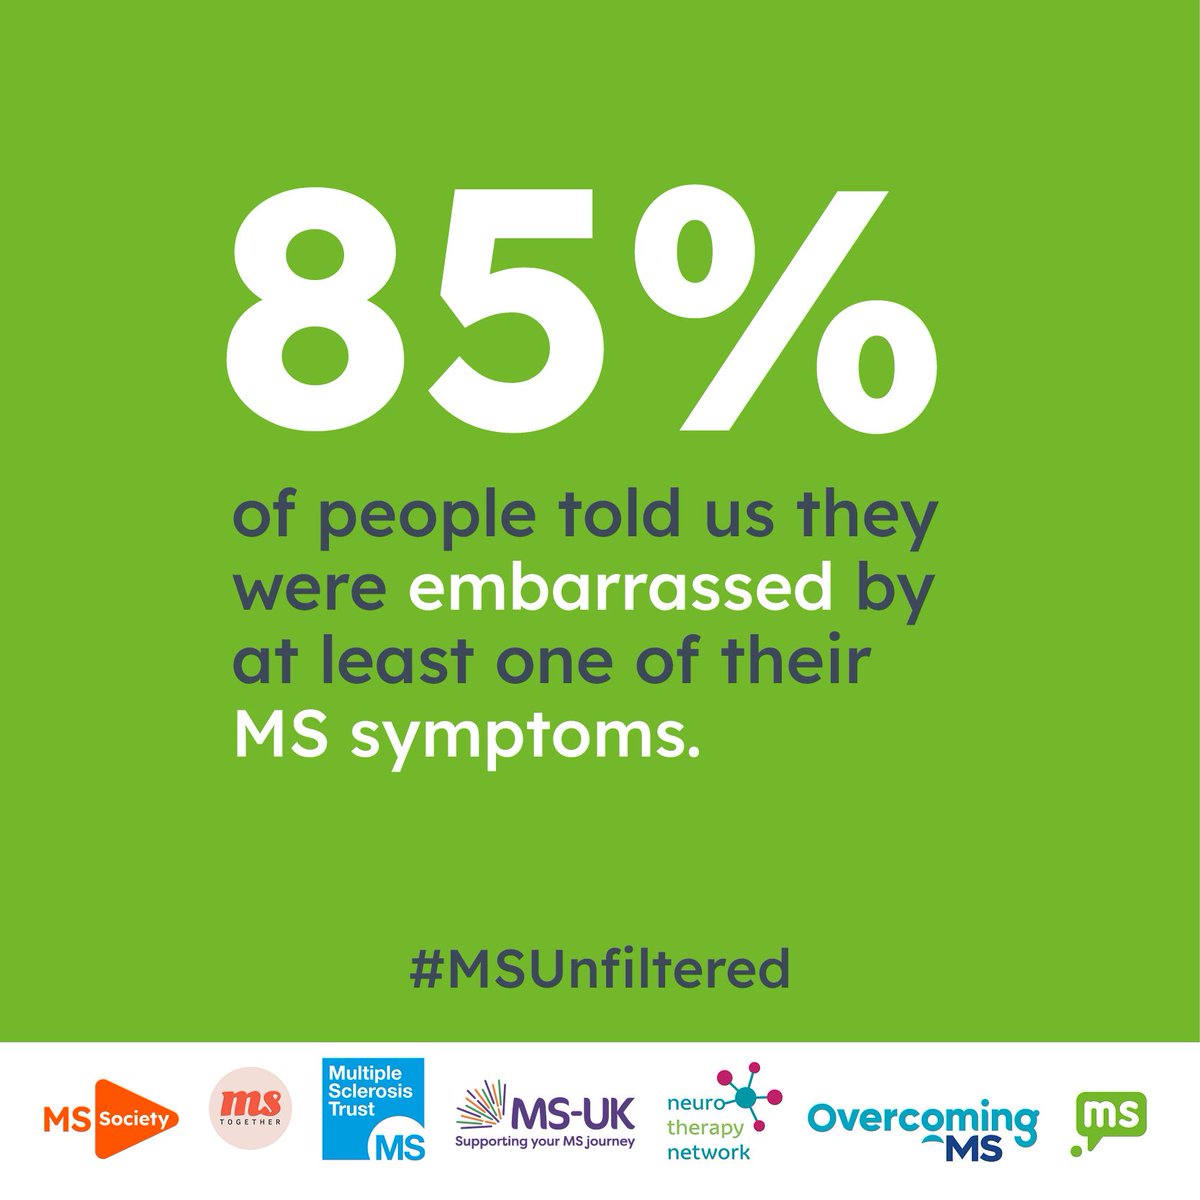 We surveyed over 1,400 MSers from across the country and found that 85% of them were embarrassed by at least one of their symptoms. Whether you have bladder issues or problems with walking, we want you to know that no symptom should too embarrassing to talk about...